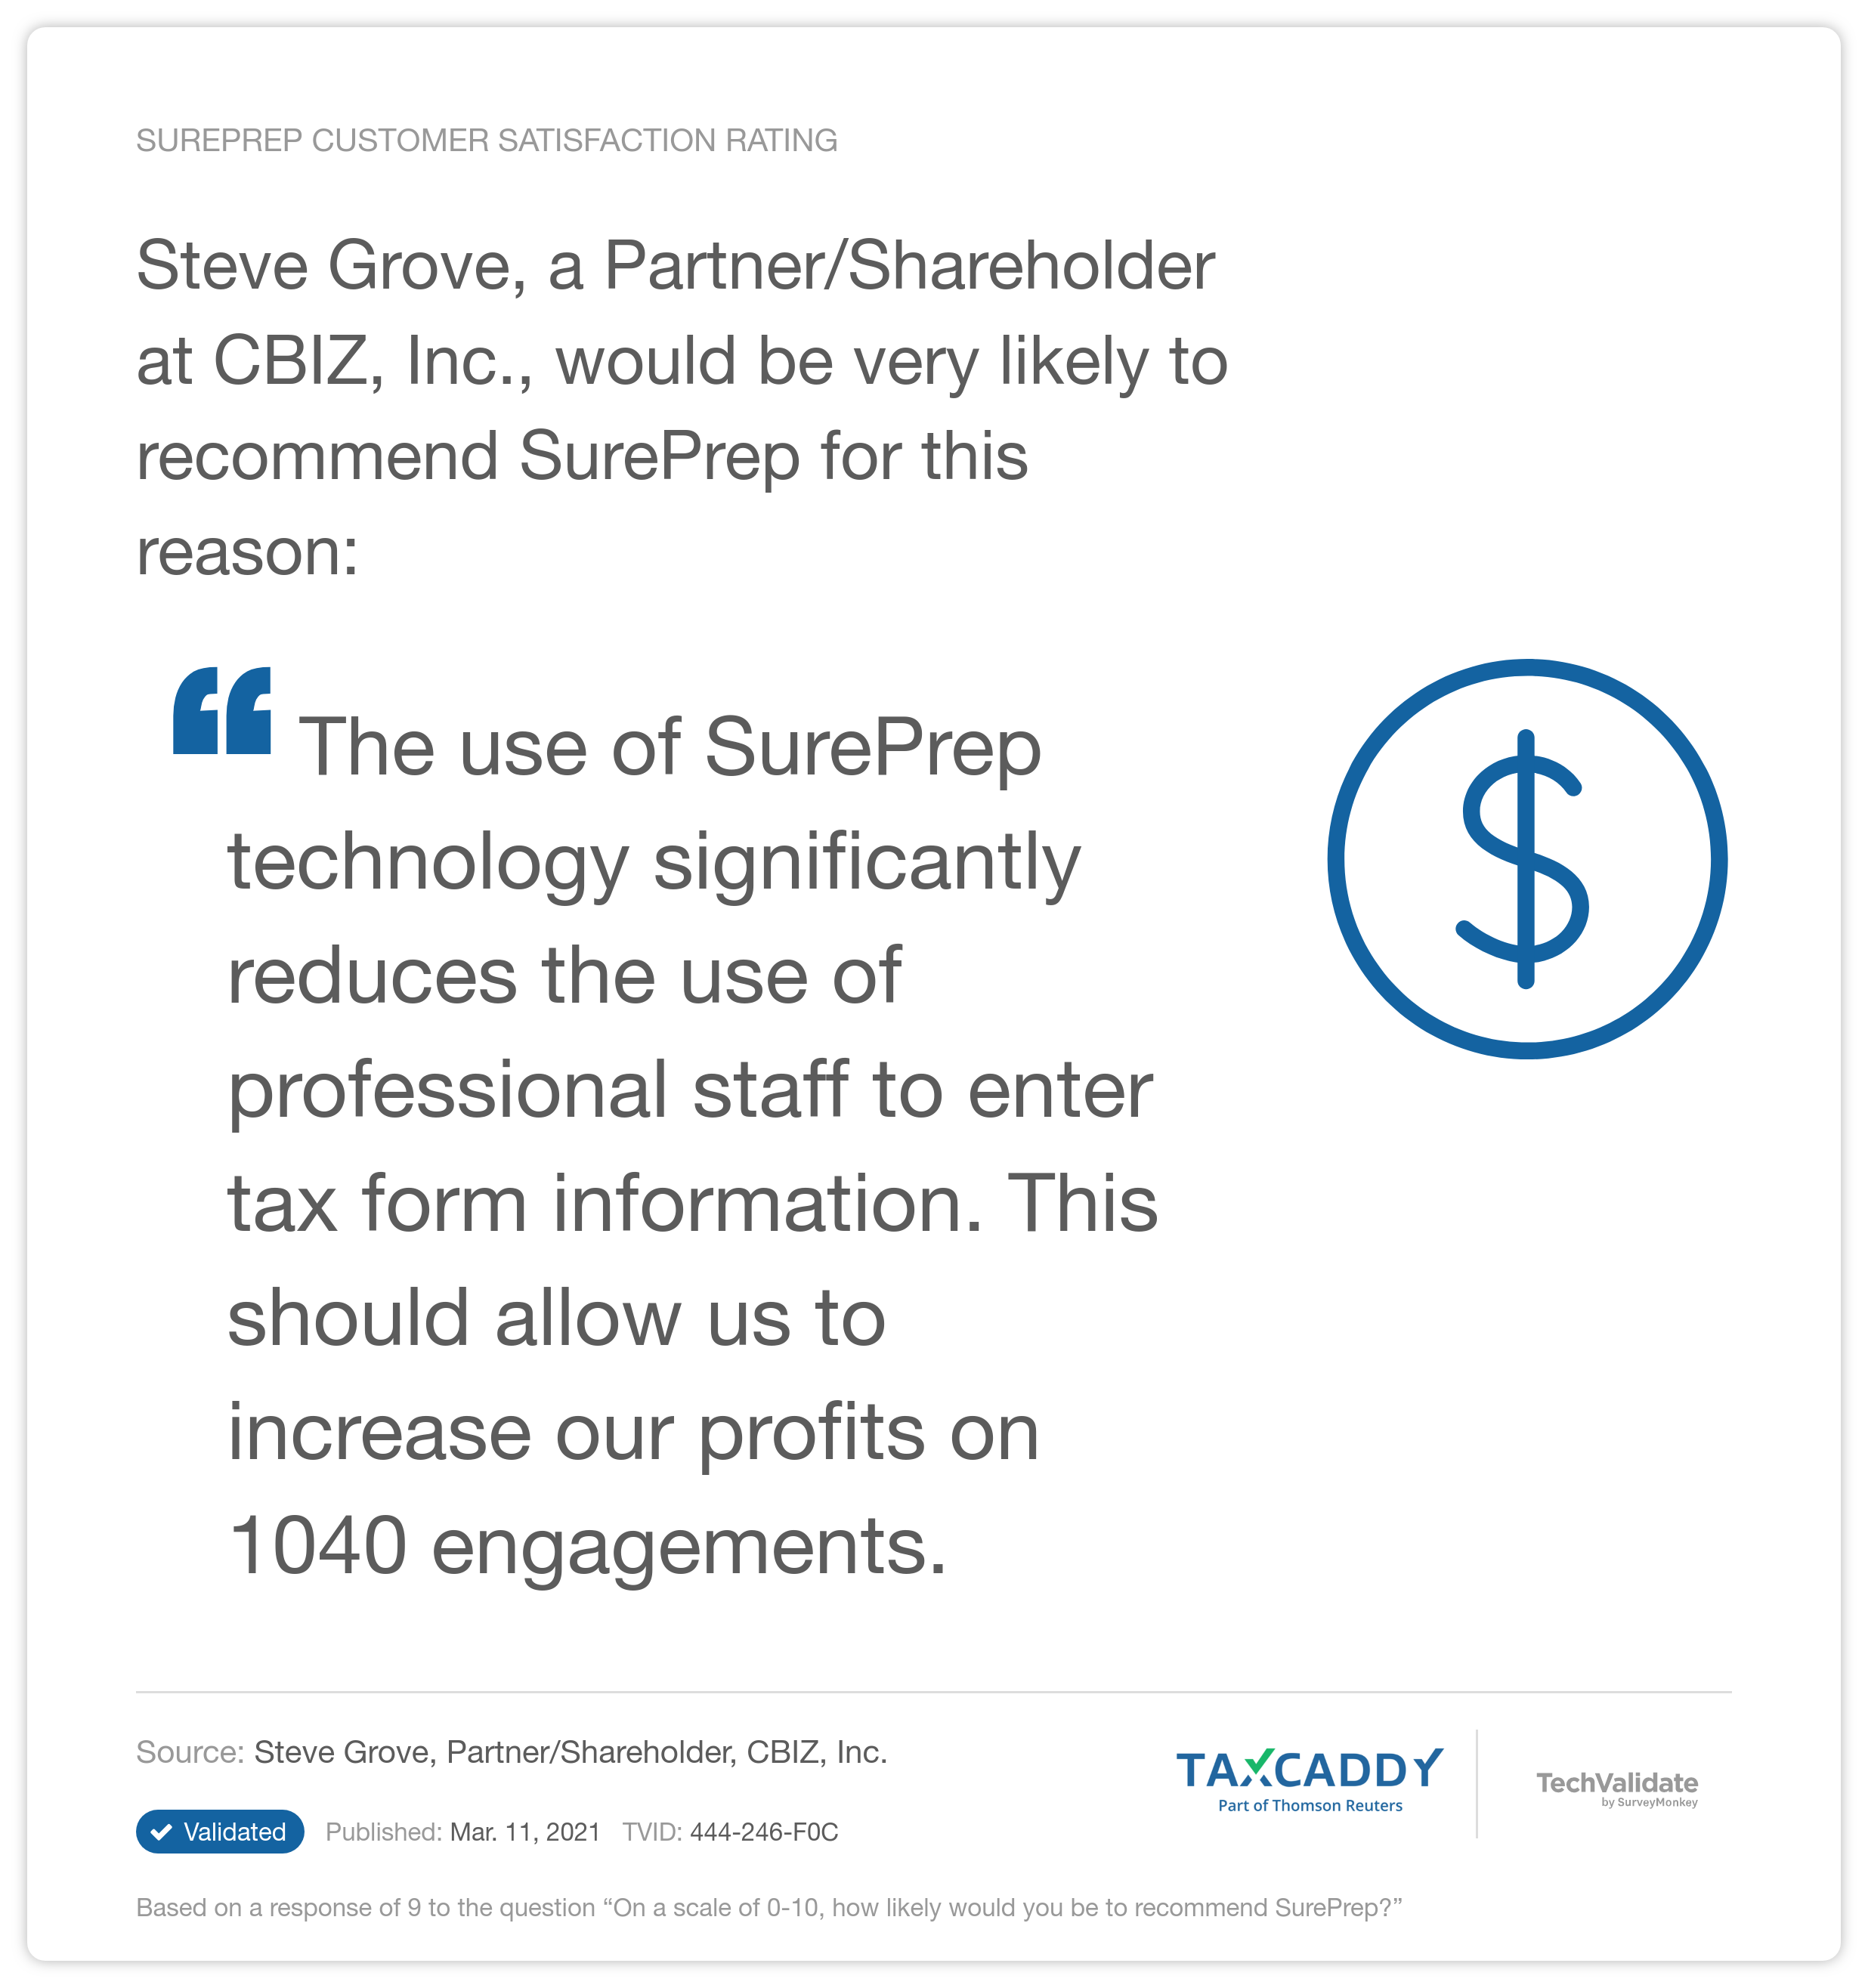 Steve Grove, a Partner/Shareholder at CBIZ, Inc., would be very likely to recommend SurePrep for this reason: "The use of SurePrep technology significantly reduces the use of professional staff to enter tax form information. This should allow us to increase our profits on 1040 engagements."